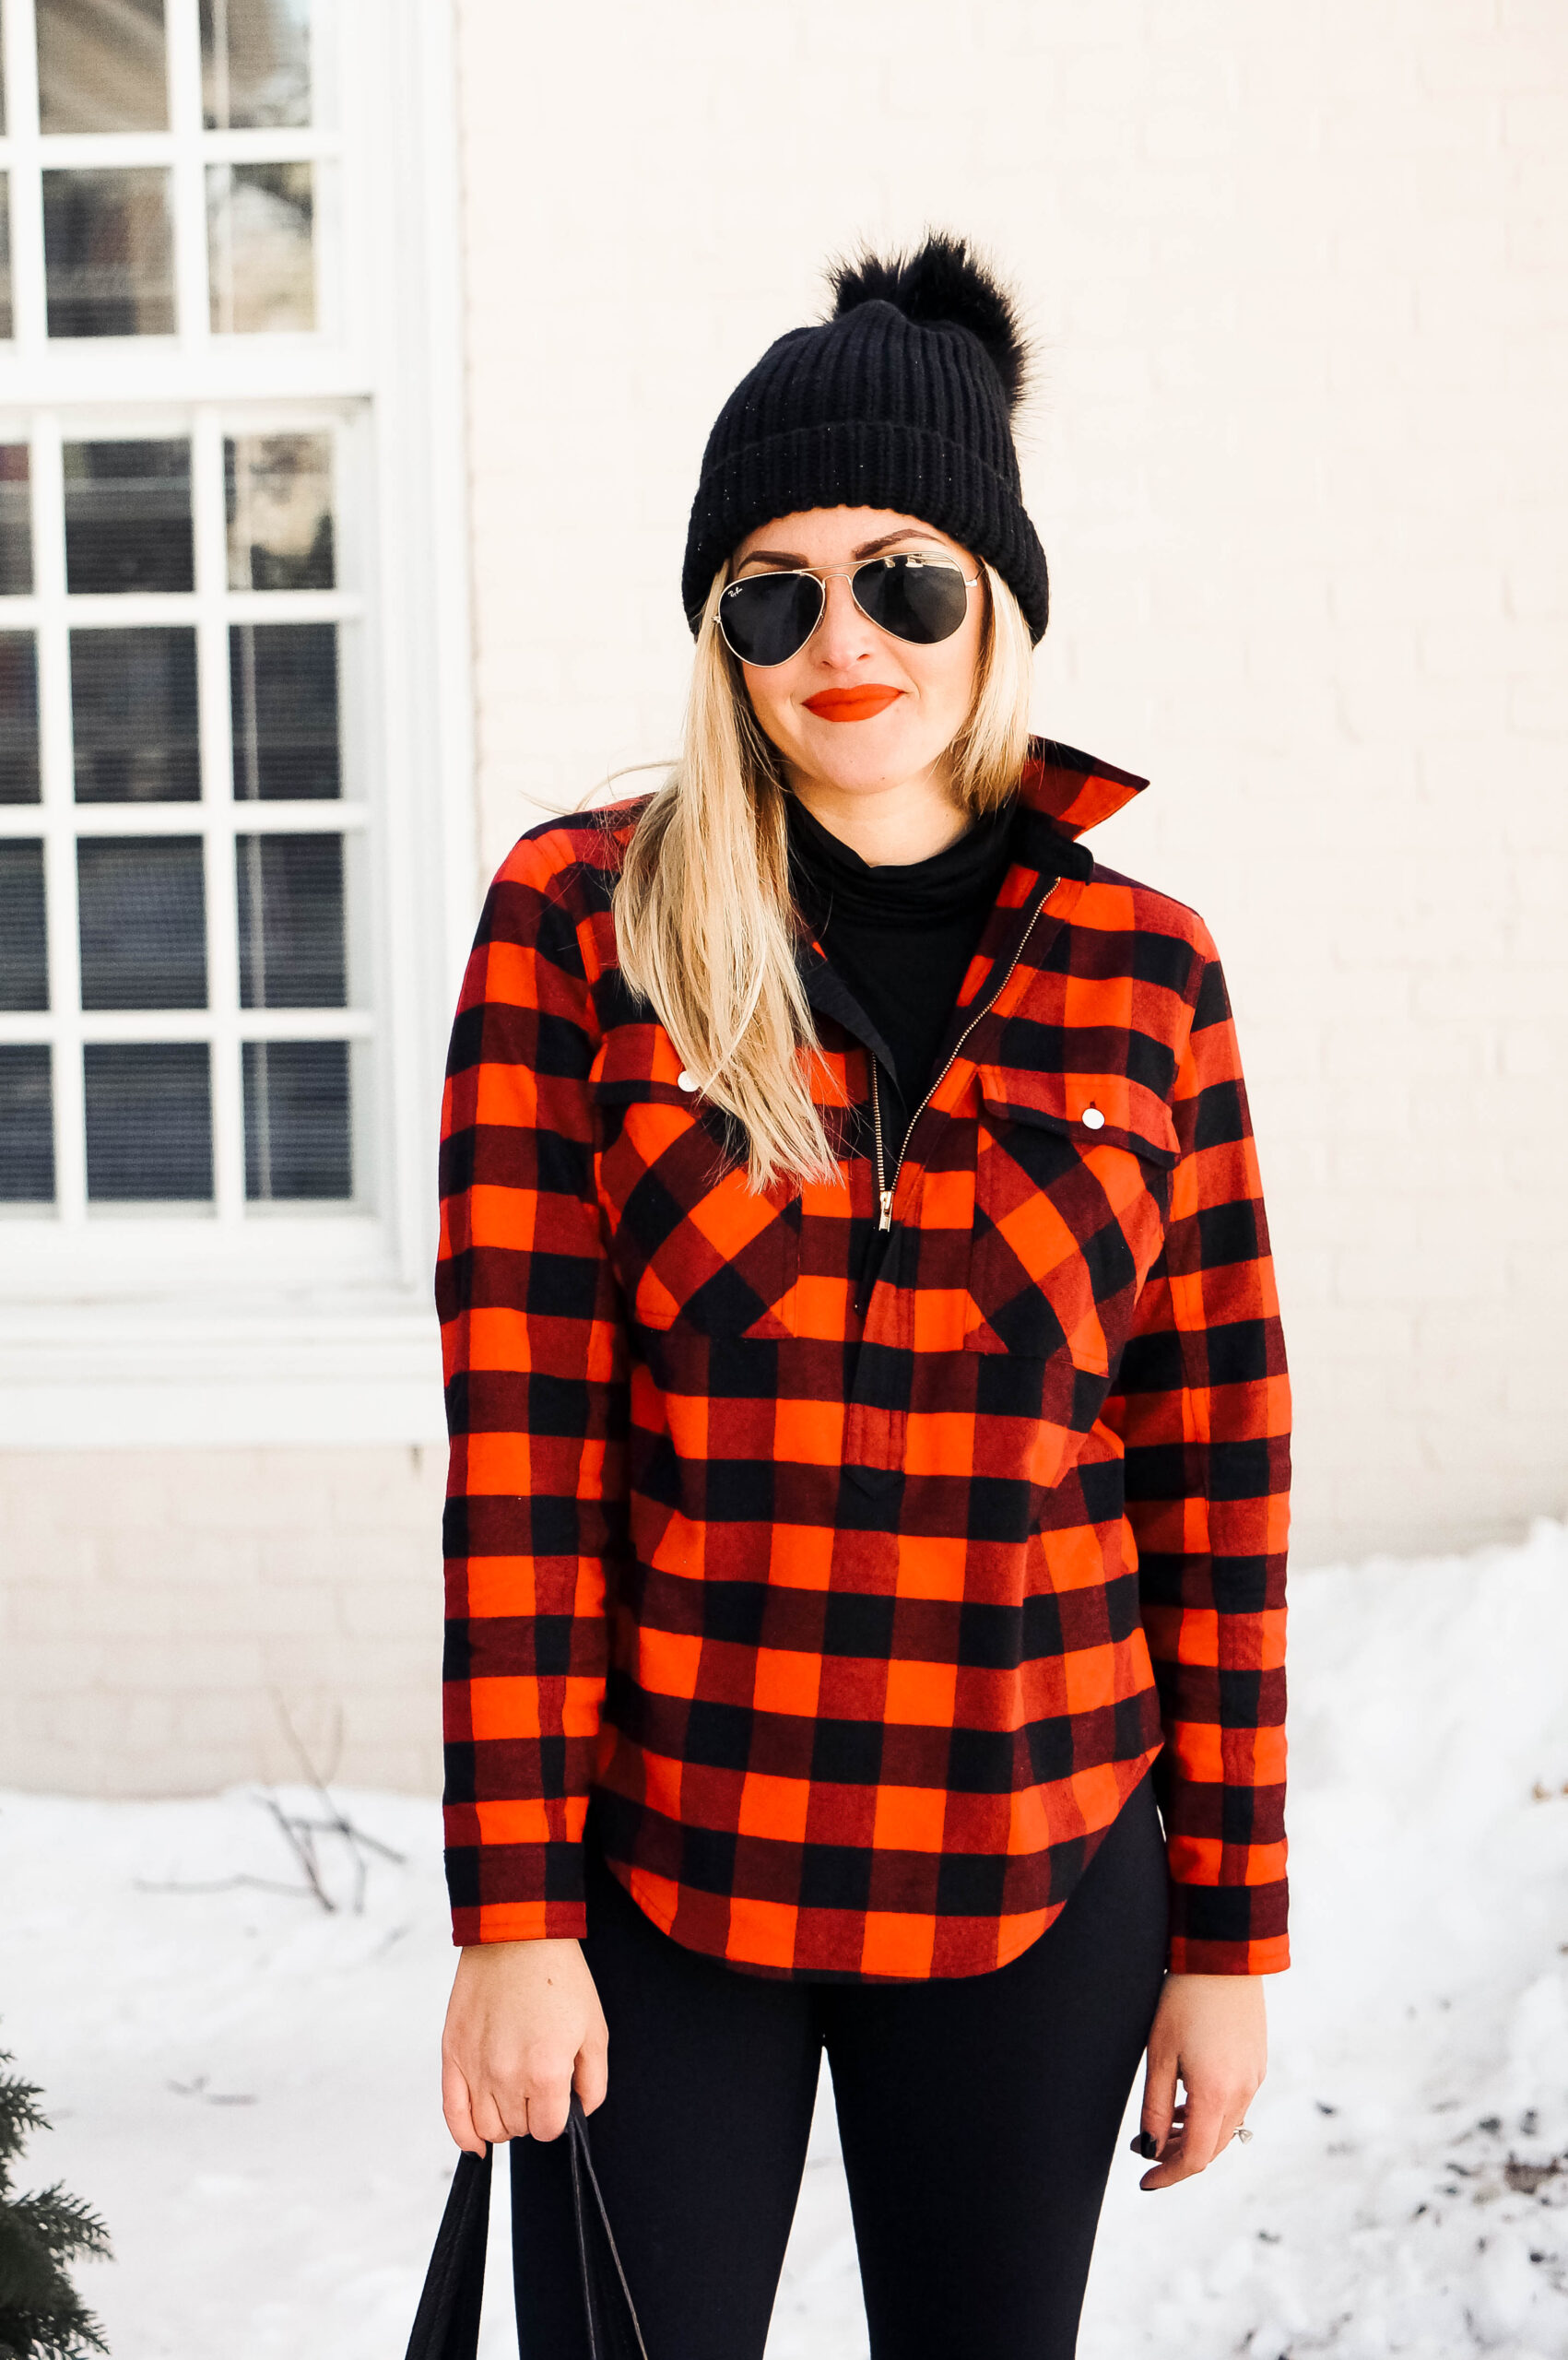 Buffalo Plaid Style - Great Home Decor Finds